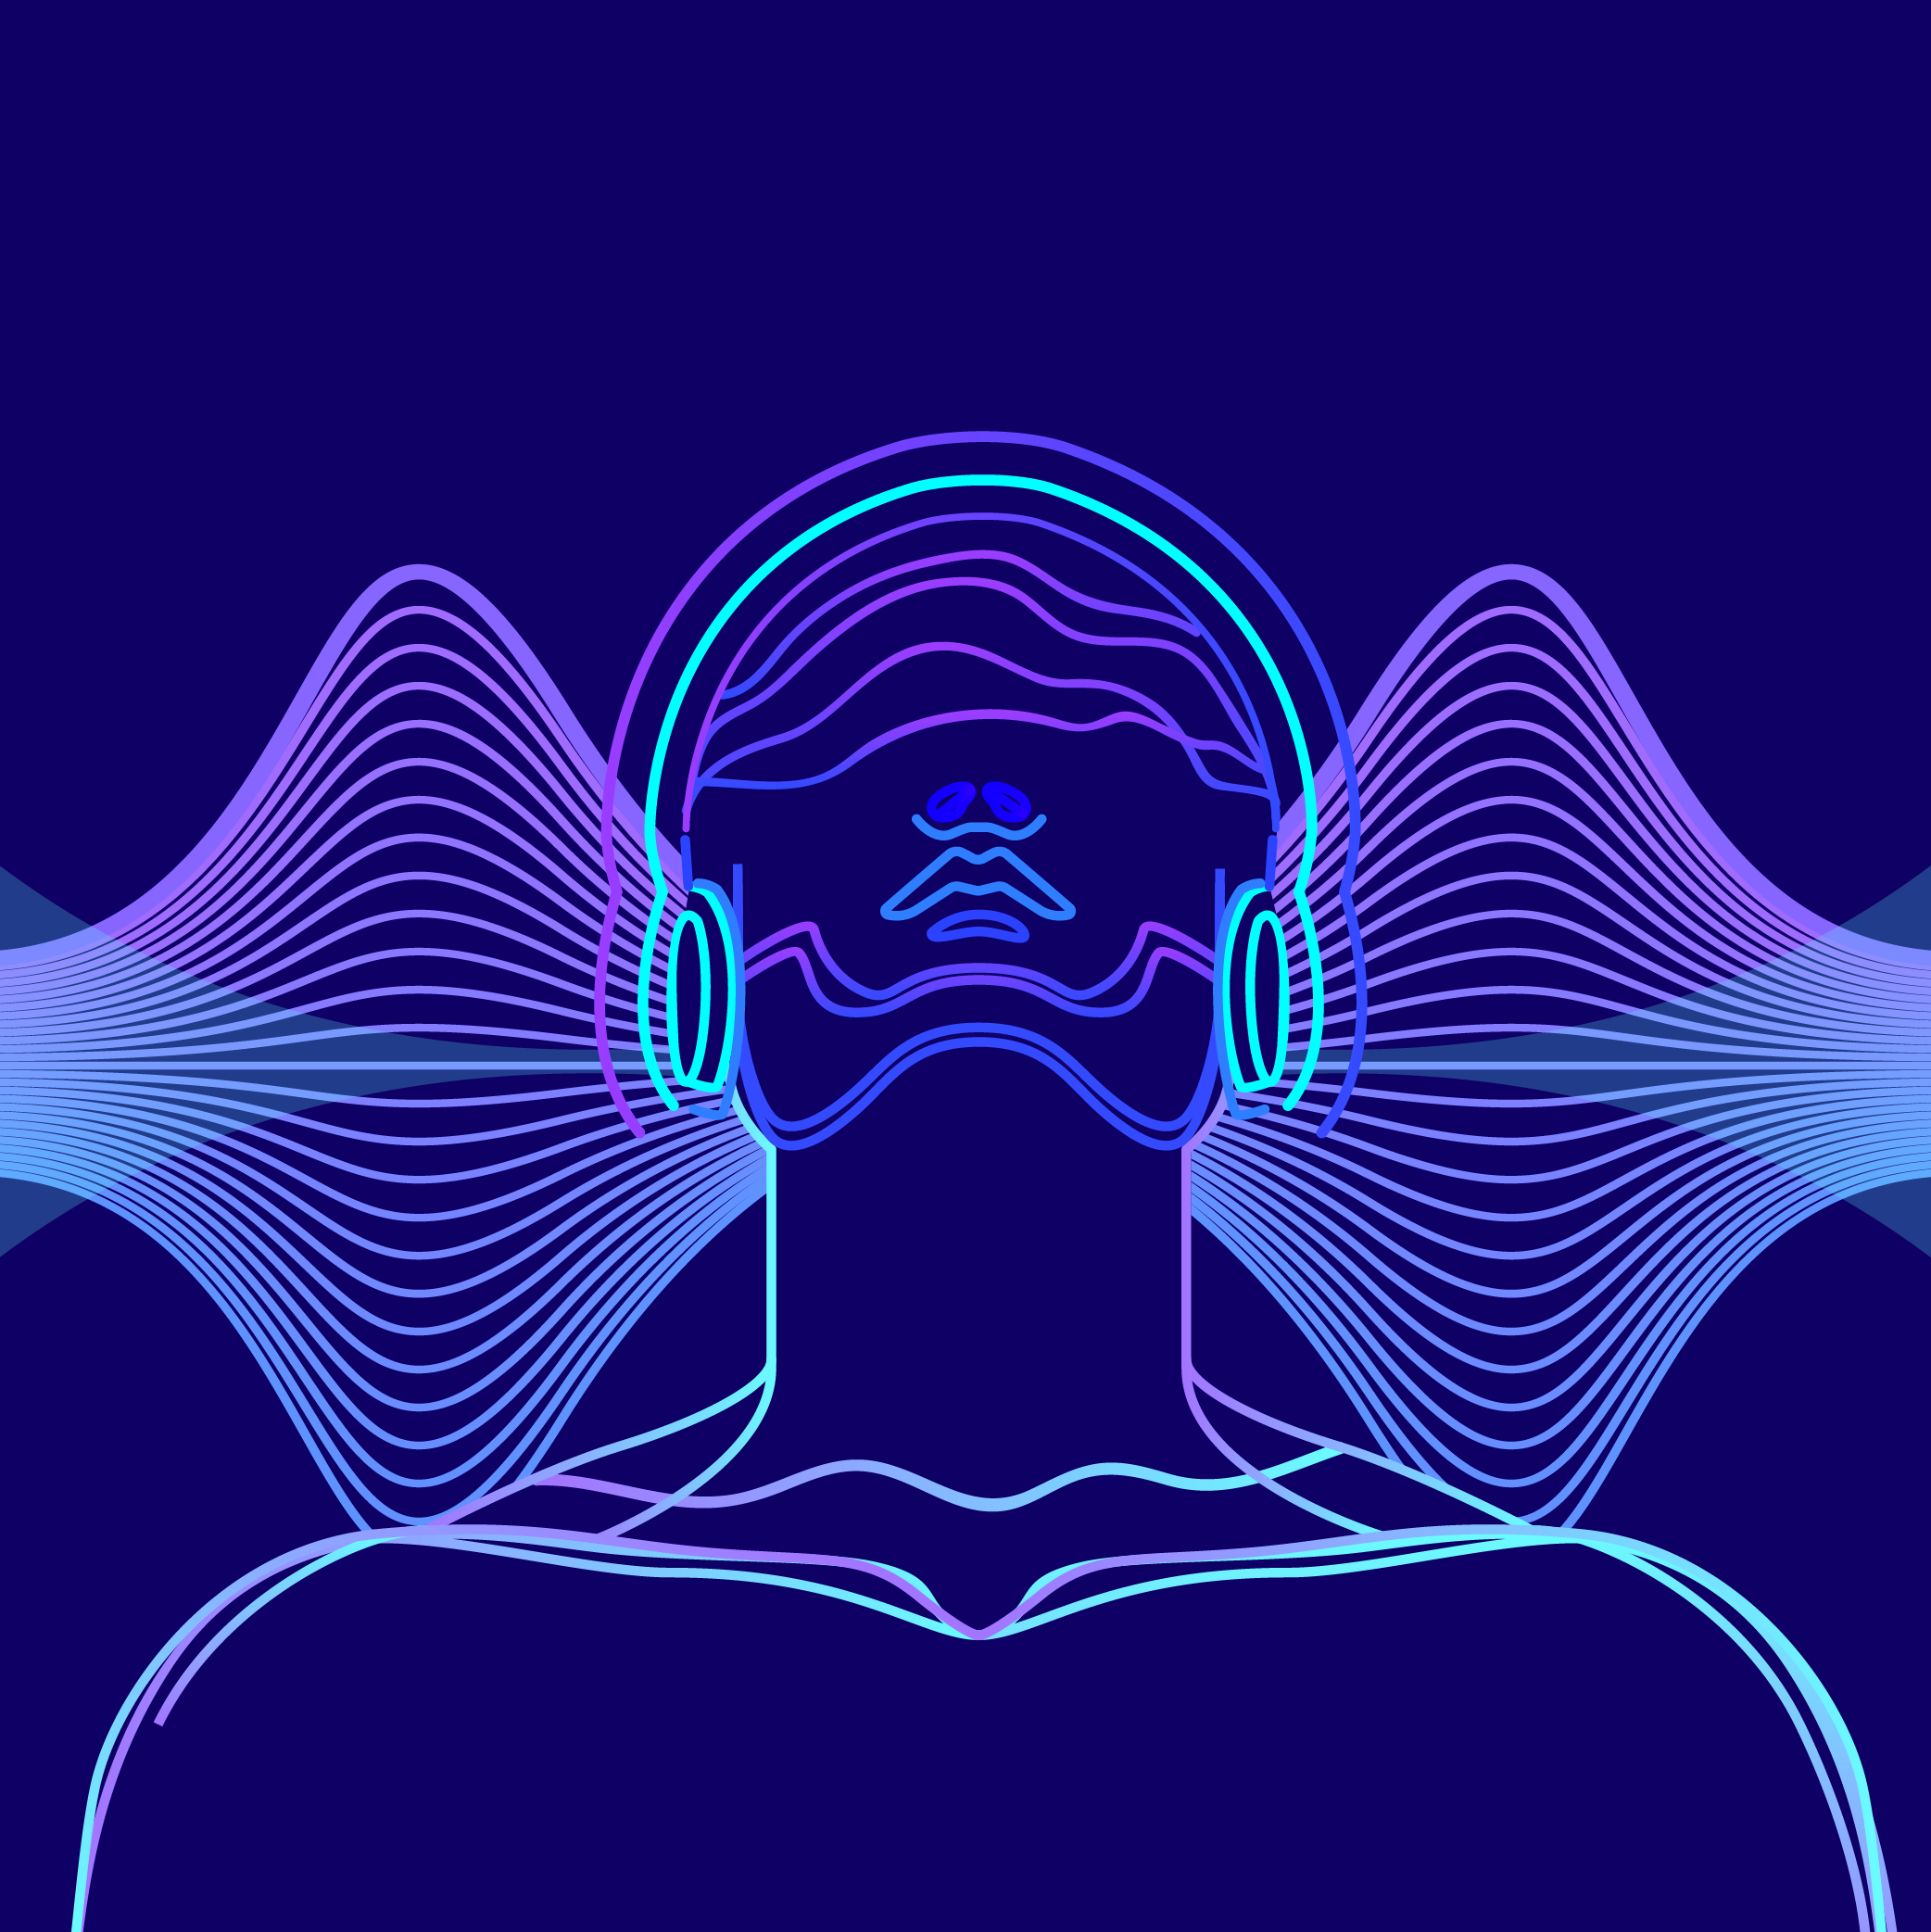 A person wearing headphones with sound waves rippling from the headphones